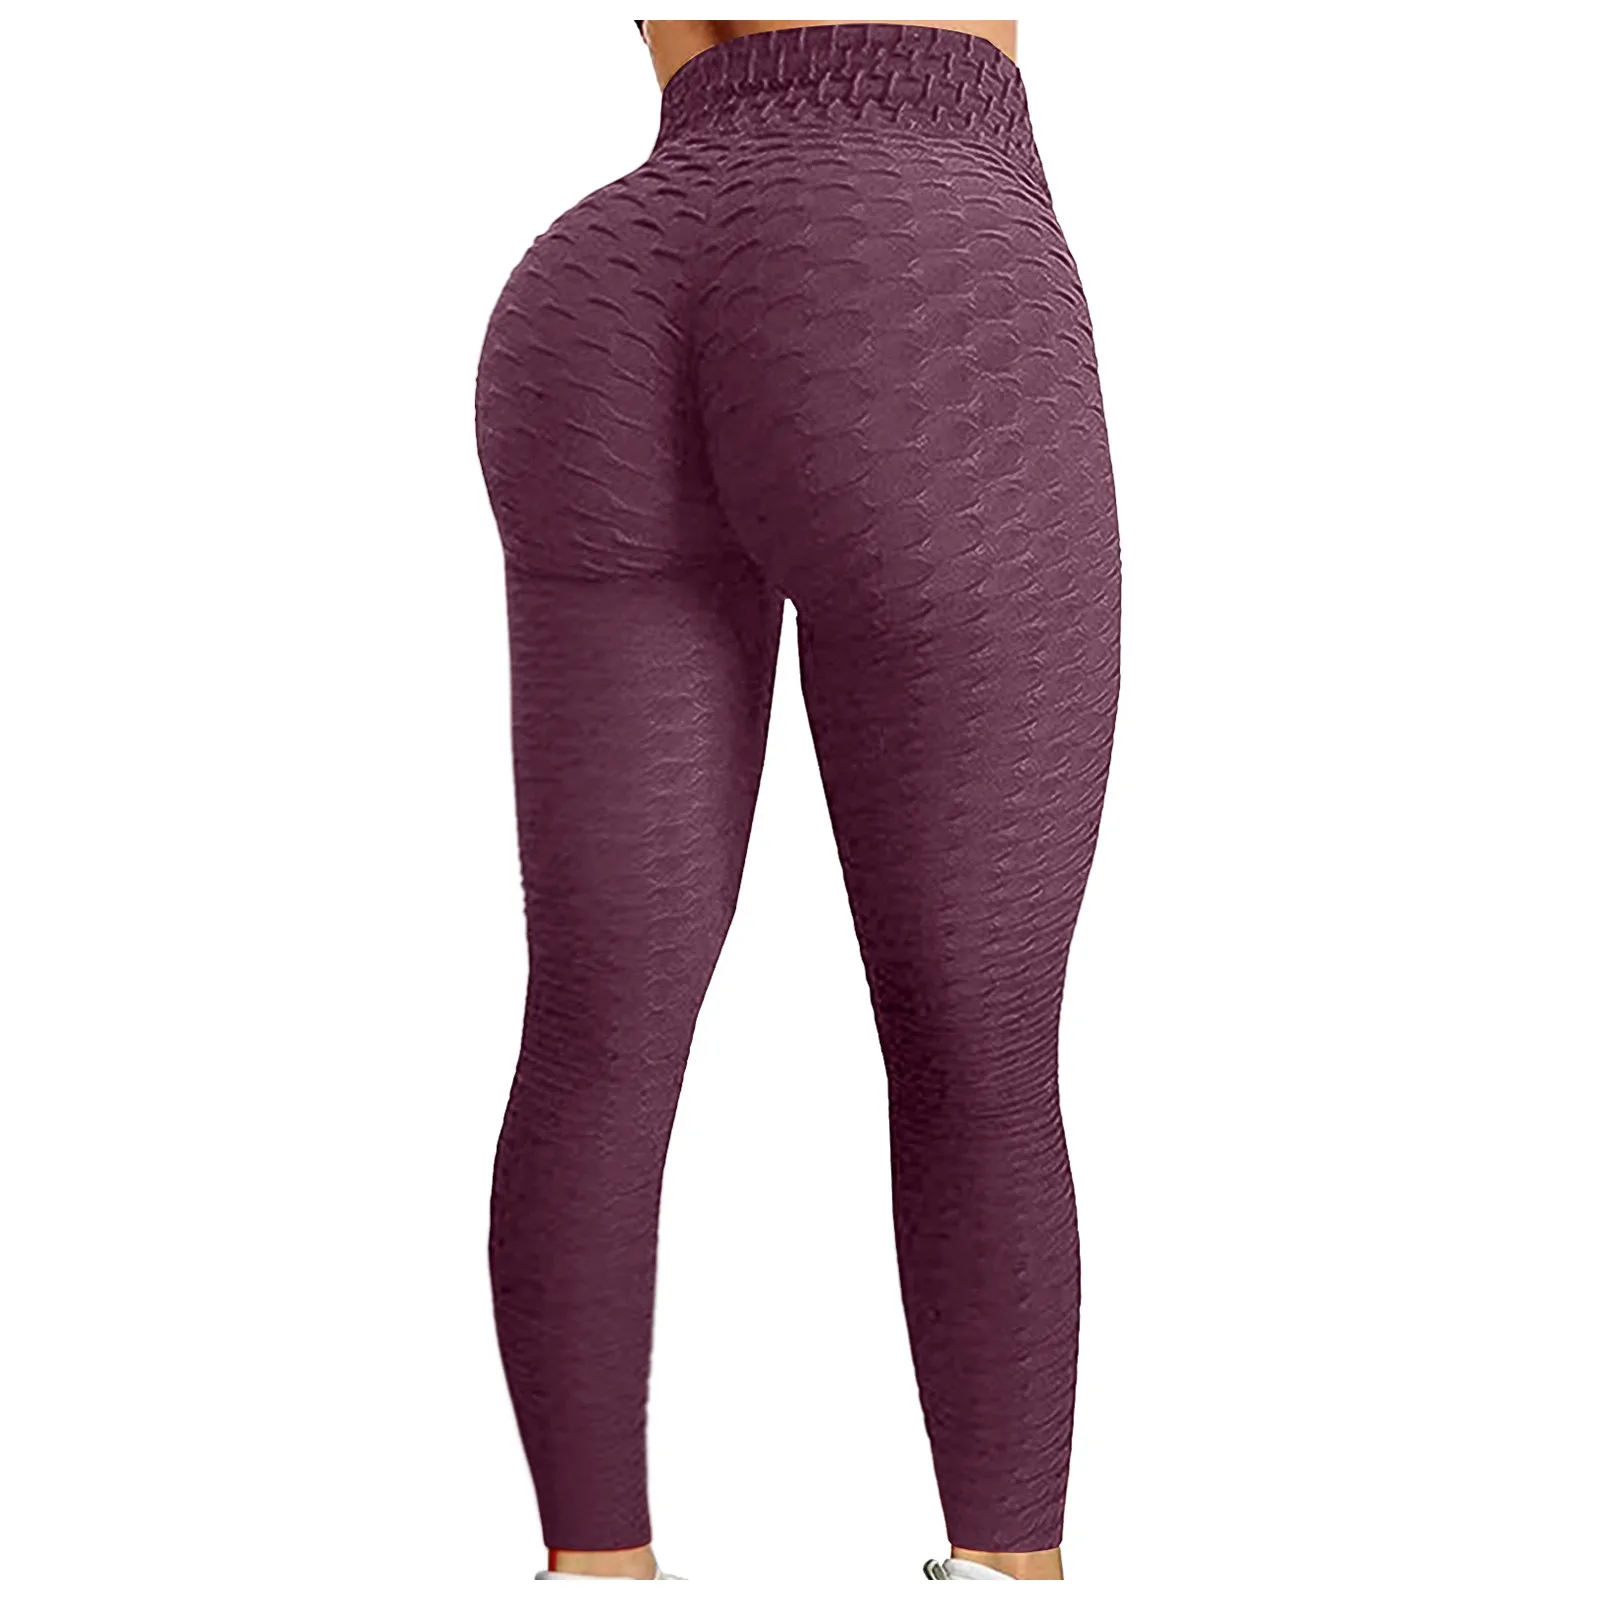 

Butt Lifting Anti Cellulite Leggings for Women High Waisted Yoga Pants Workout Tummy Control Sport Tights